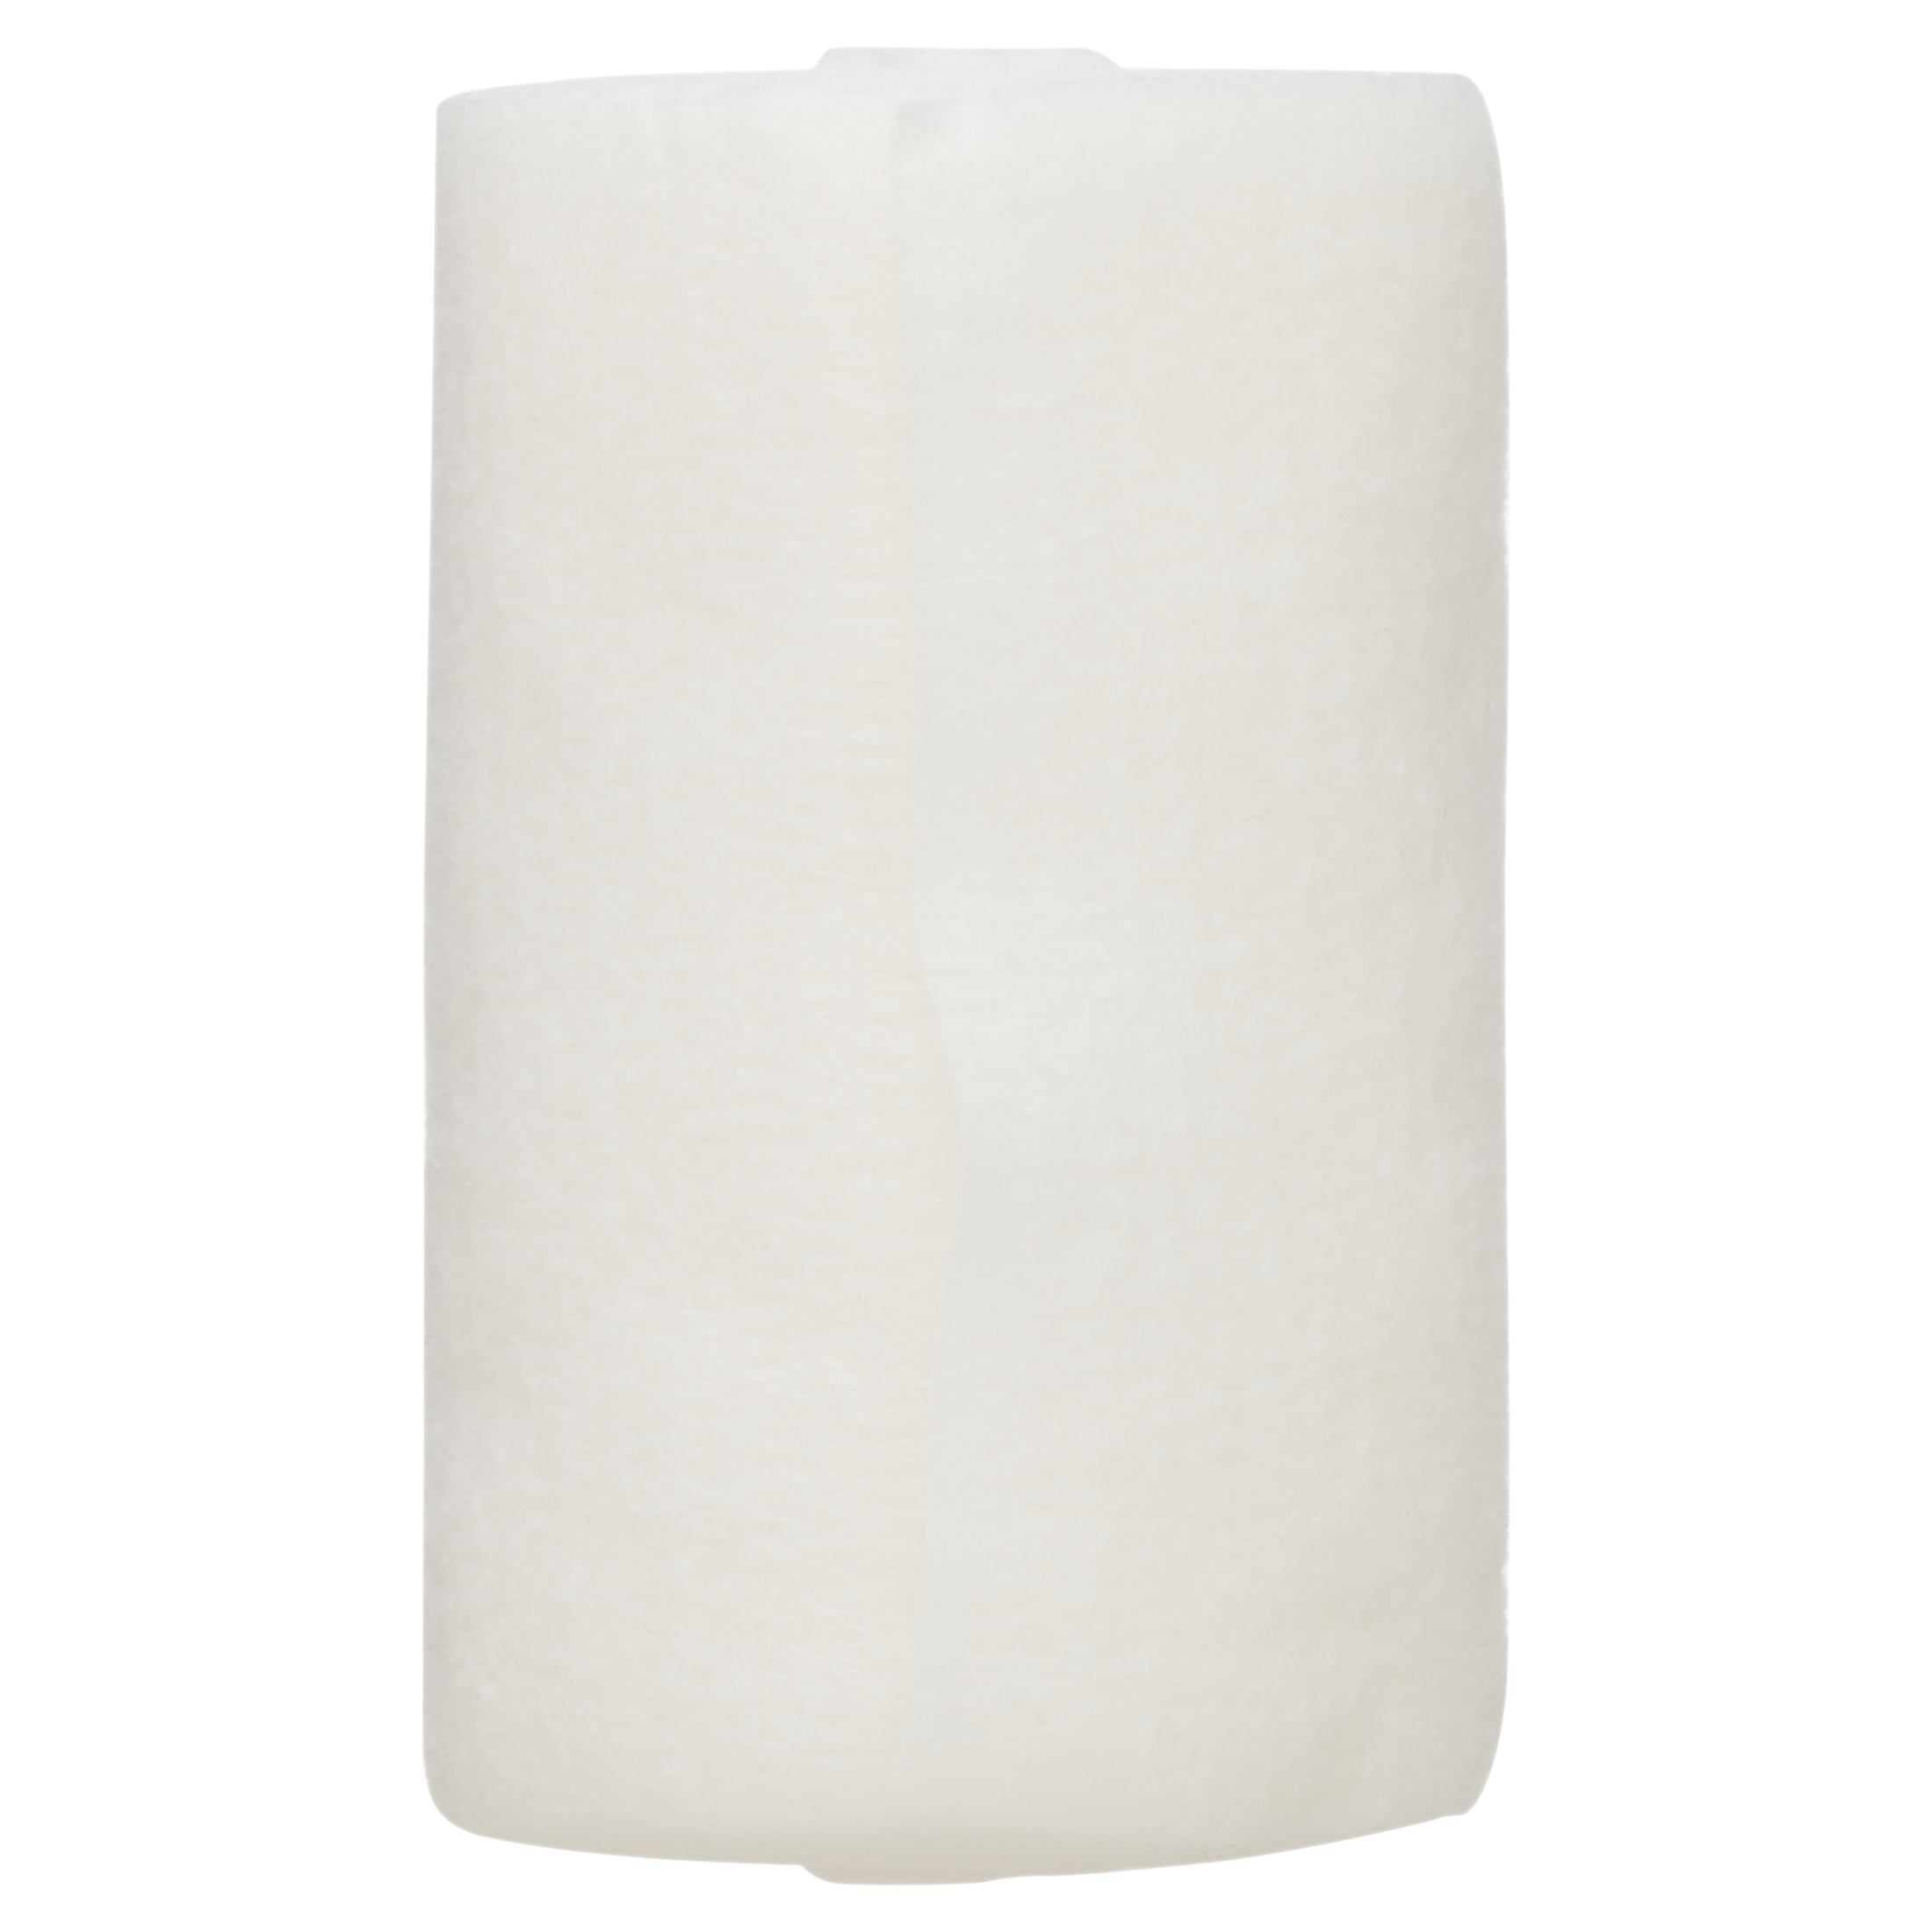 Equate Rolled Gauze, 3" x 2.5 yd, 5 Count - image 5 of 8